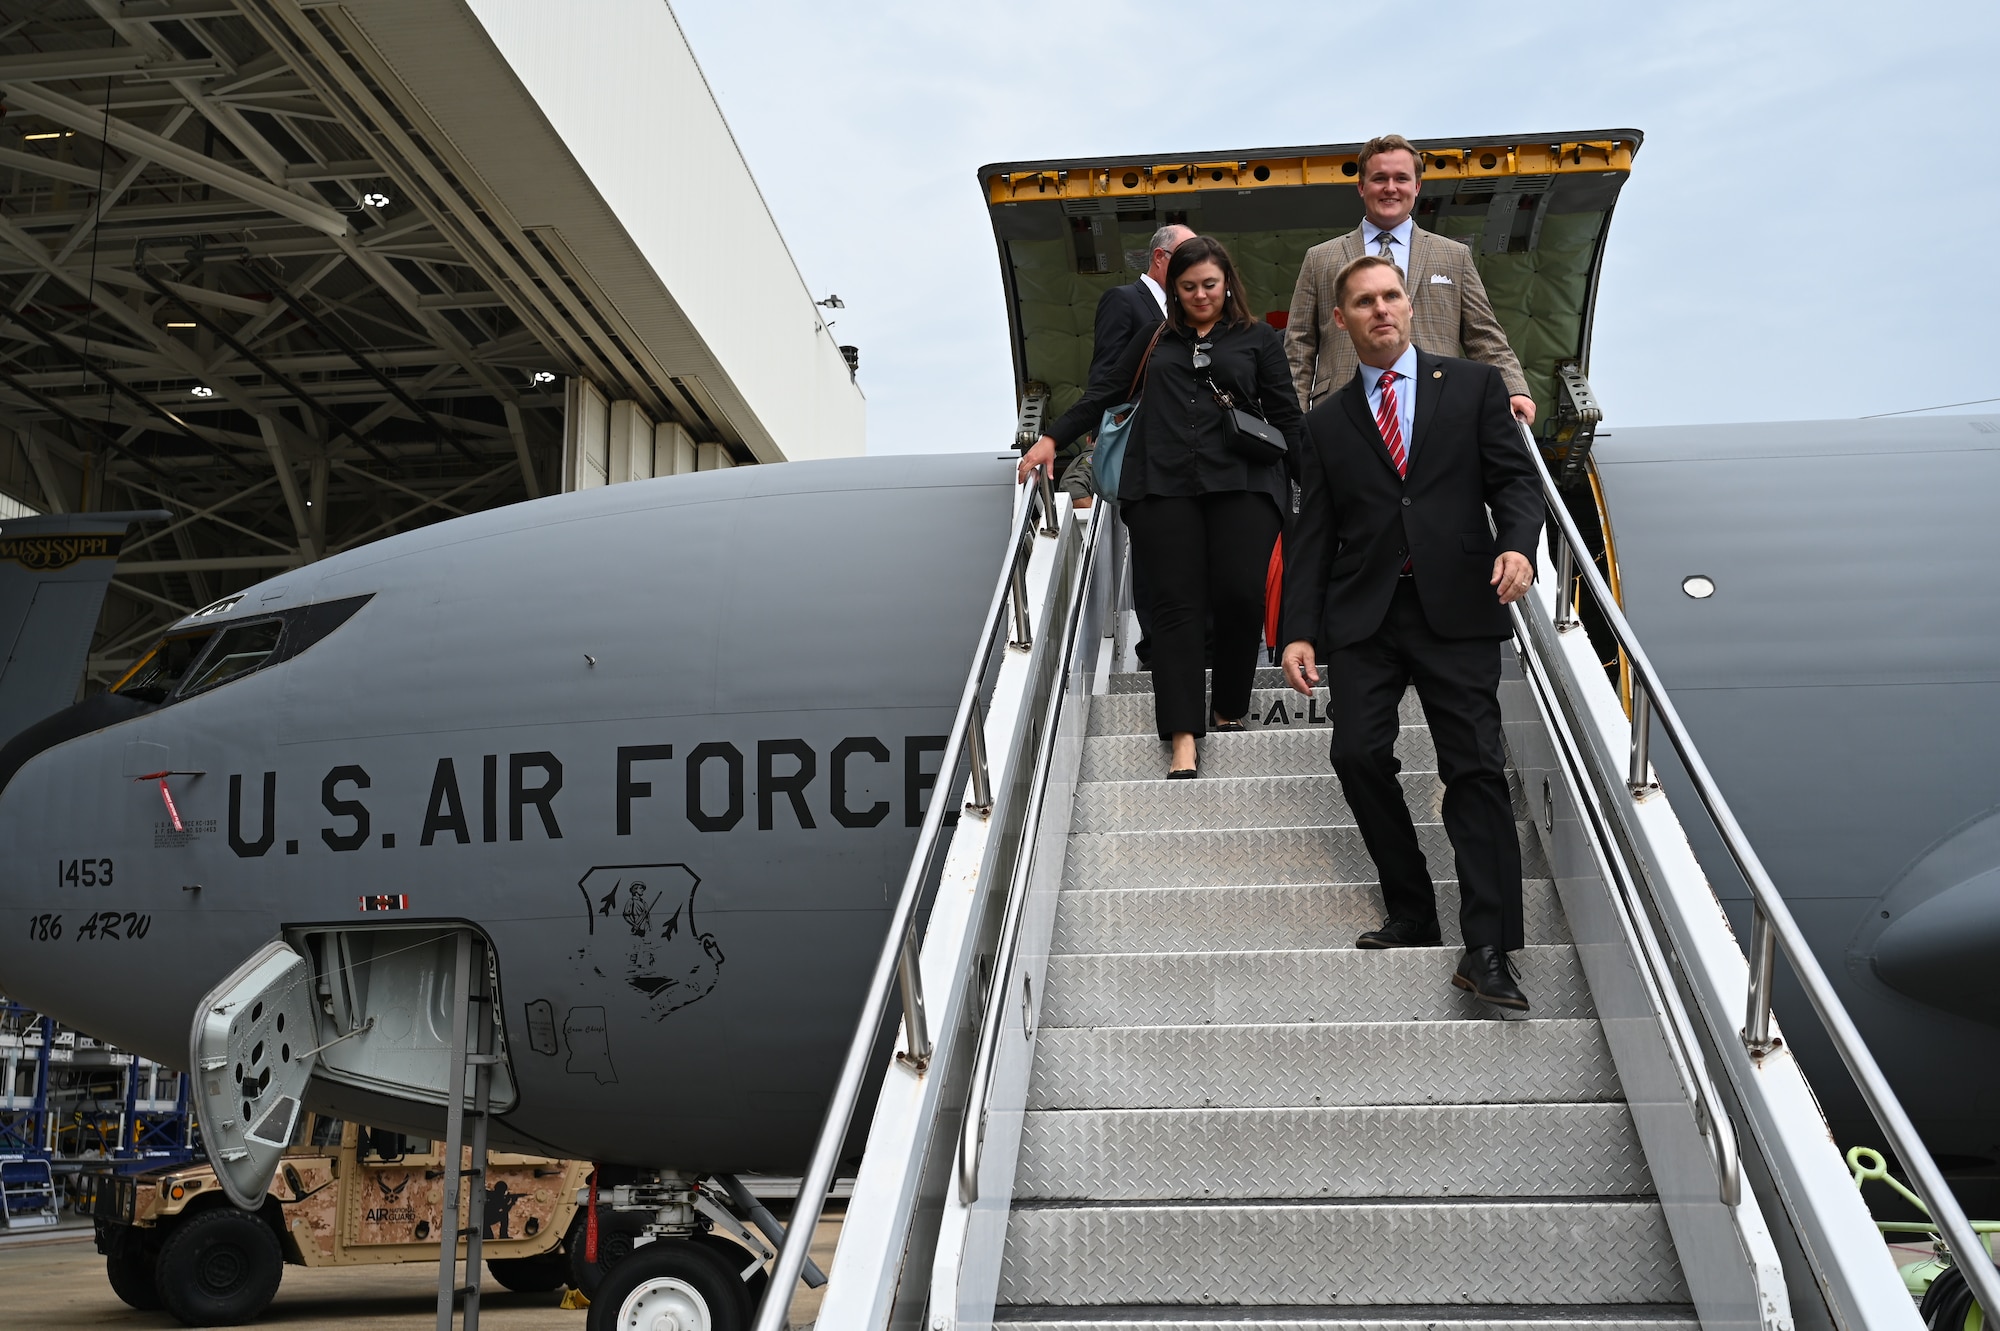 Congressman Michael Guest departs a KC-135R Stratotanker at Key Field Air National Guard Base, Meridian, Mississippi, Sept. 25, 2023, following a tour of the aircraft. Earlier, Congressman Guest held a roundtable at the 186th Air Refueling Wing to discuss efforts to bring the KC-46 Pegasus aircraft, the next generation of aerial refueling, to the base.